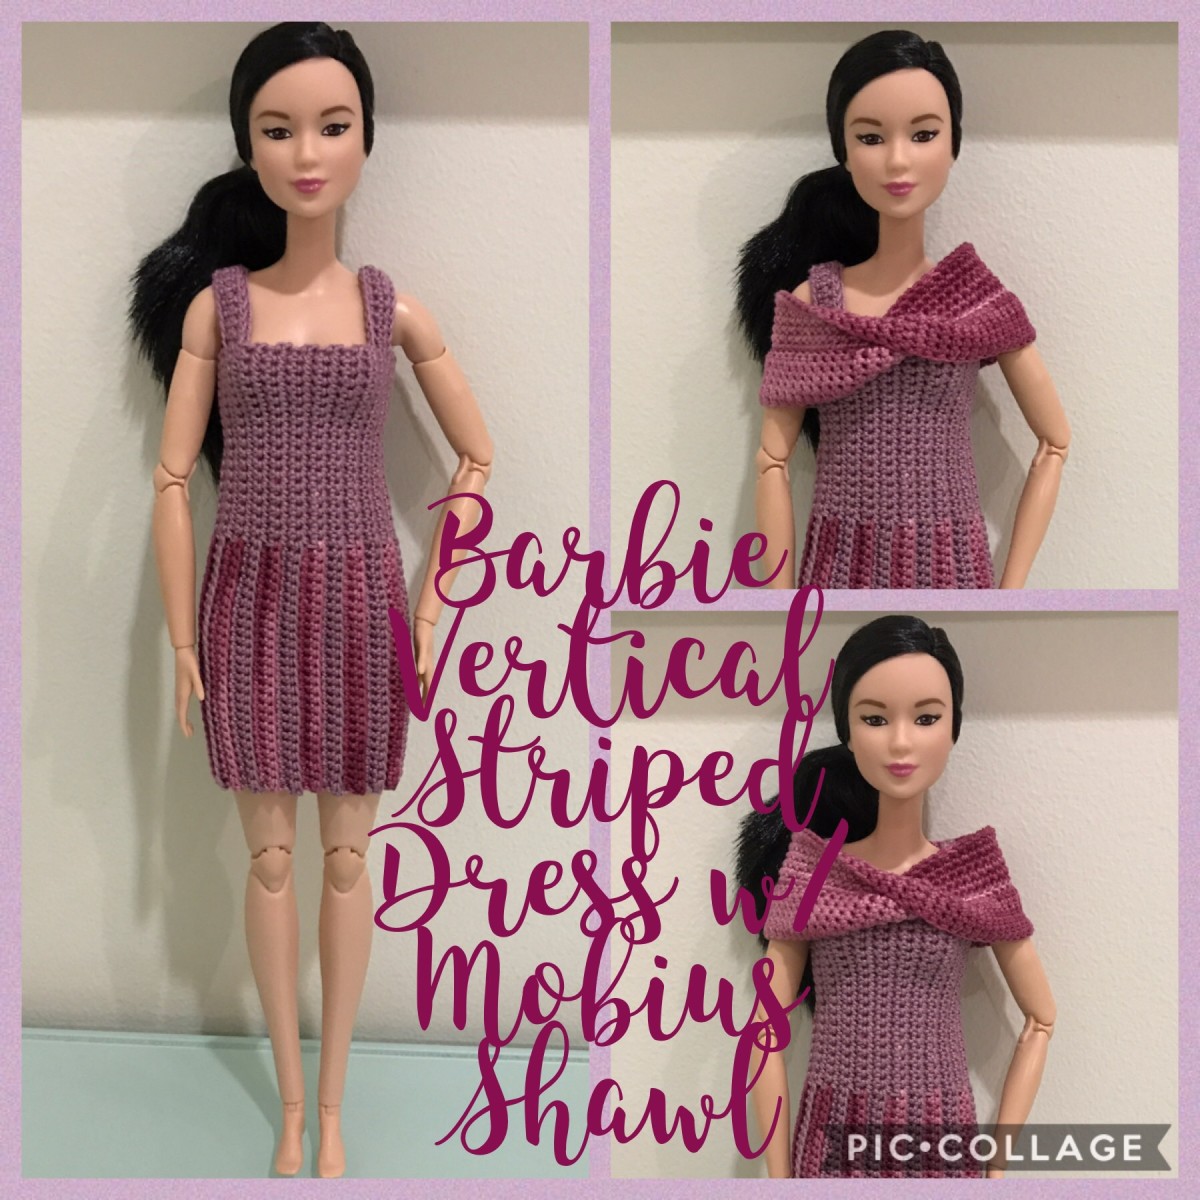 Barbie Vertical Striped Dress With Mobius Shawl